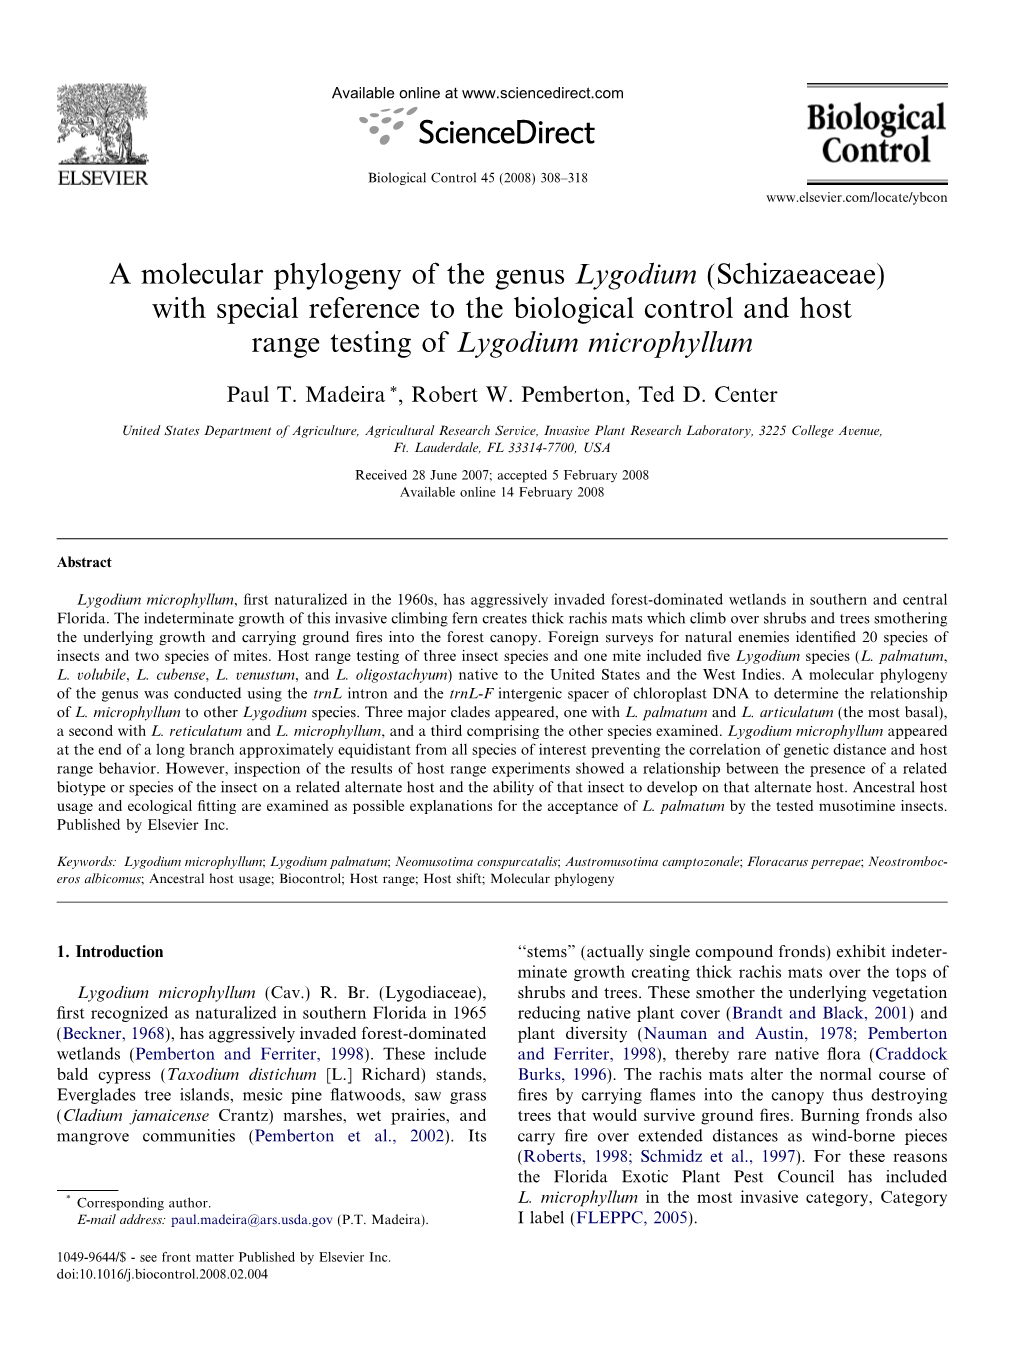 A Molecular Phylogeny of the Genus Lygodium (Schizaeaceae) with Special Reference to the Biological Control and Host Range Testing of Lygodium Microphyllum